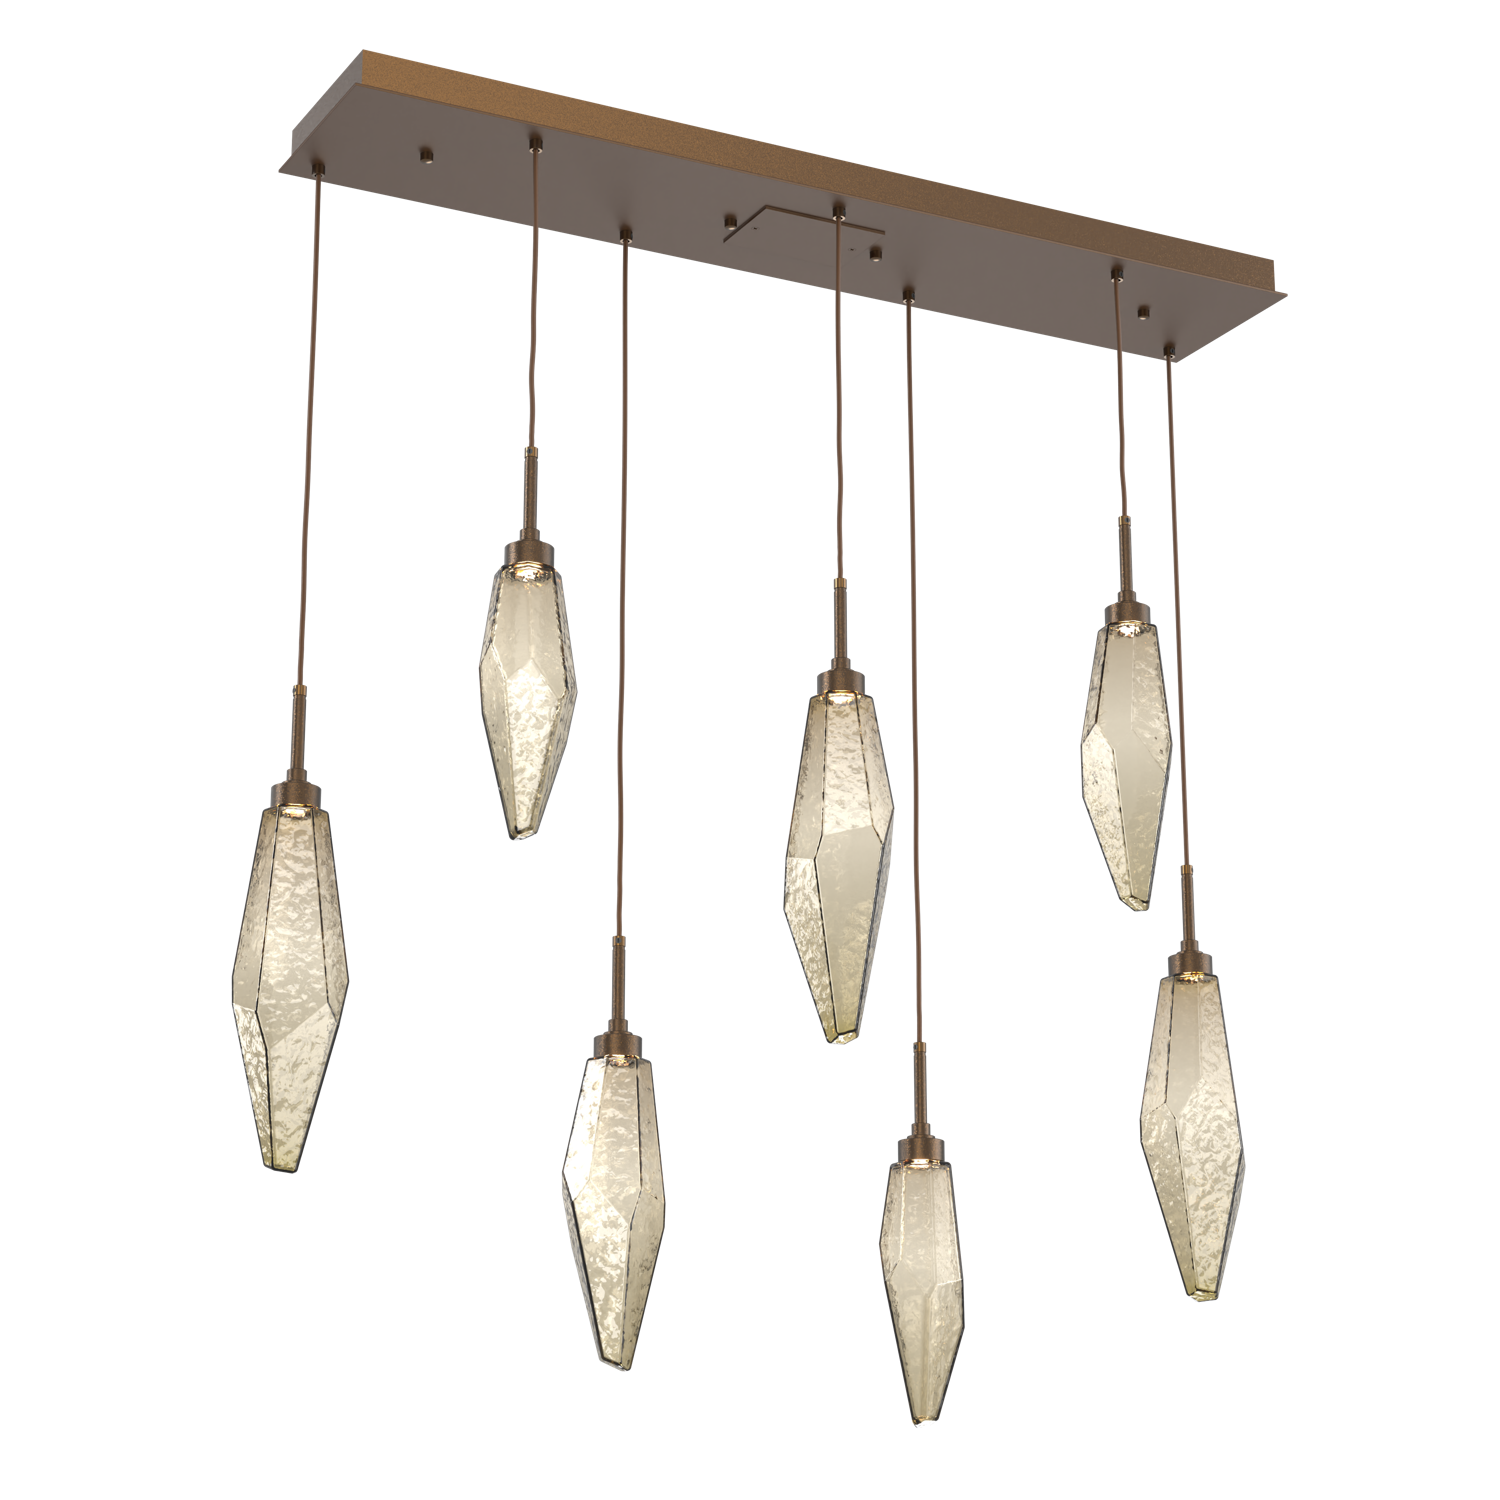 PLB0050-07-FB-CB-Hammerton-Studio-Rock-Crystal-7-light-linear-pendant-chandelier-with-flat-bronze-finish-and-chilled-bronze-blown-glass-shades-and-LED-lamping